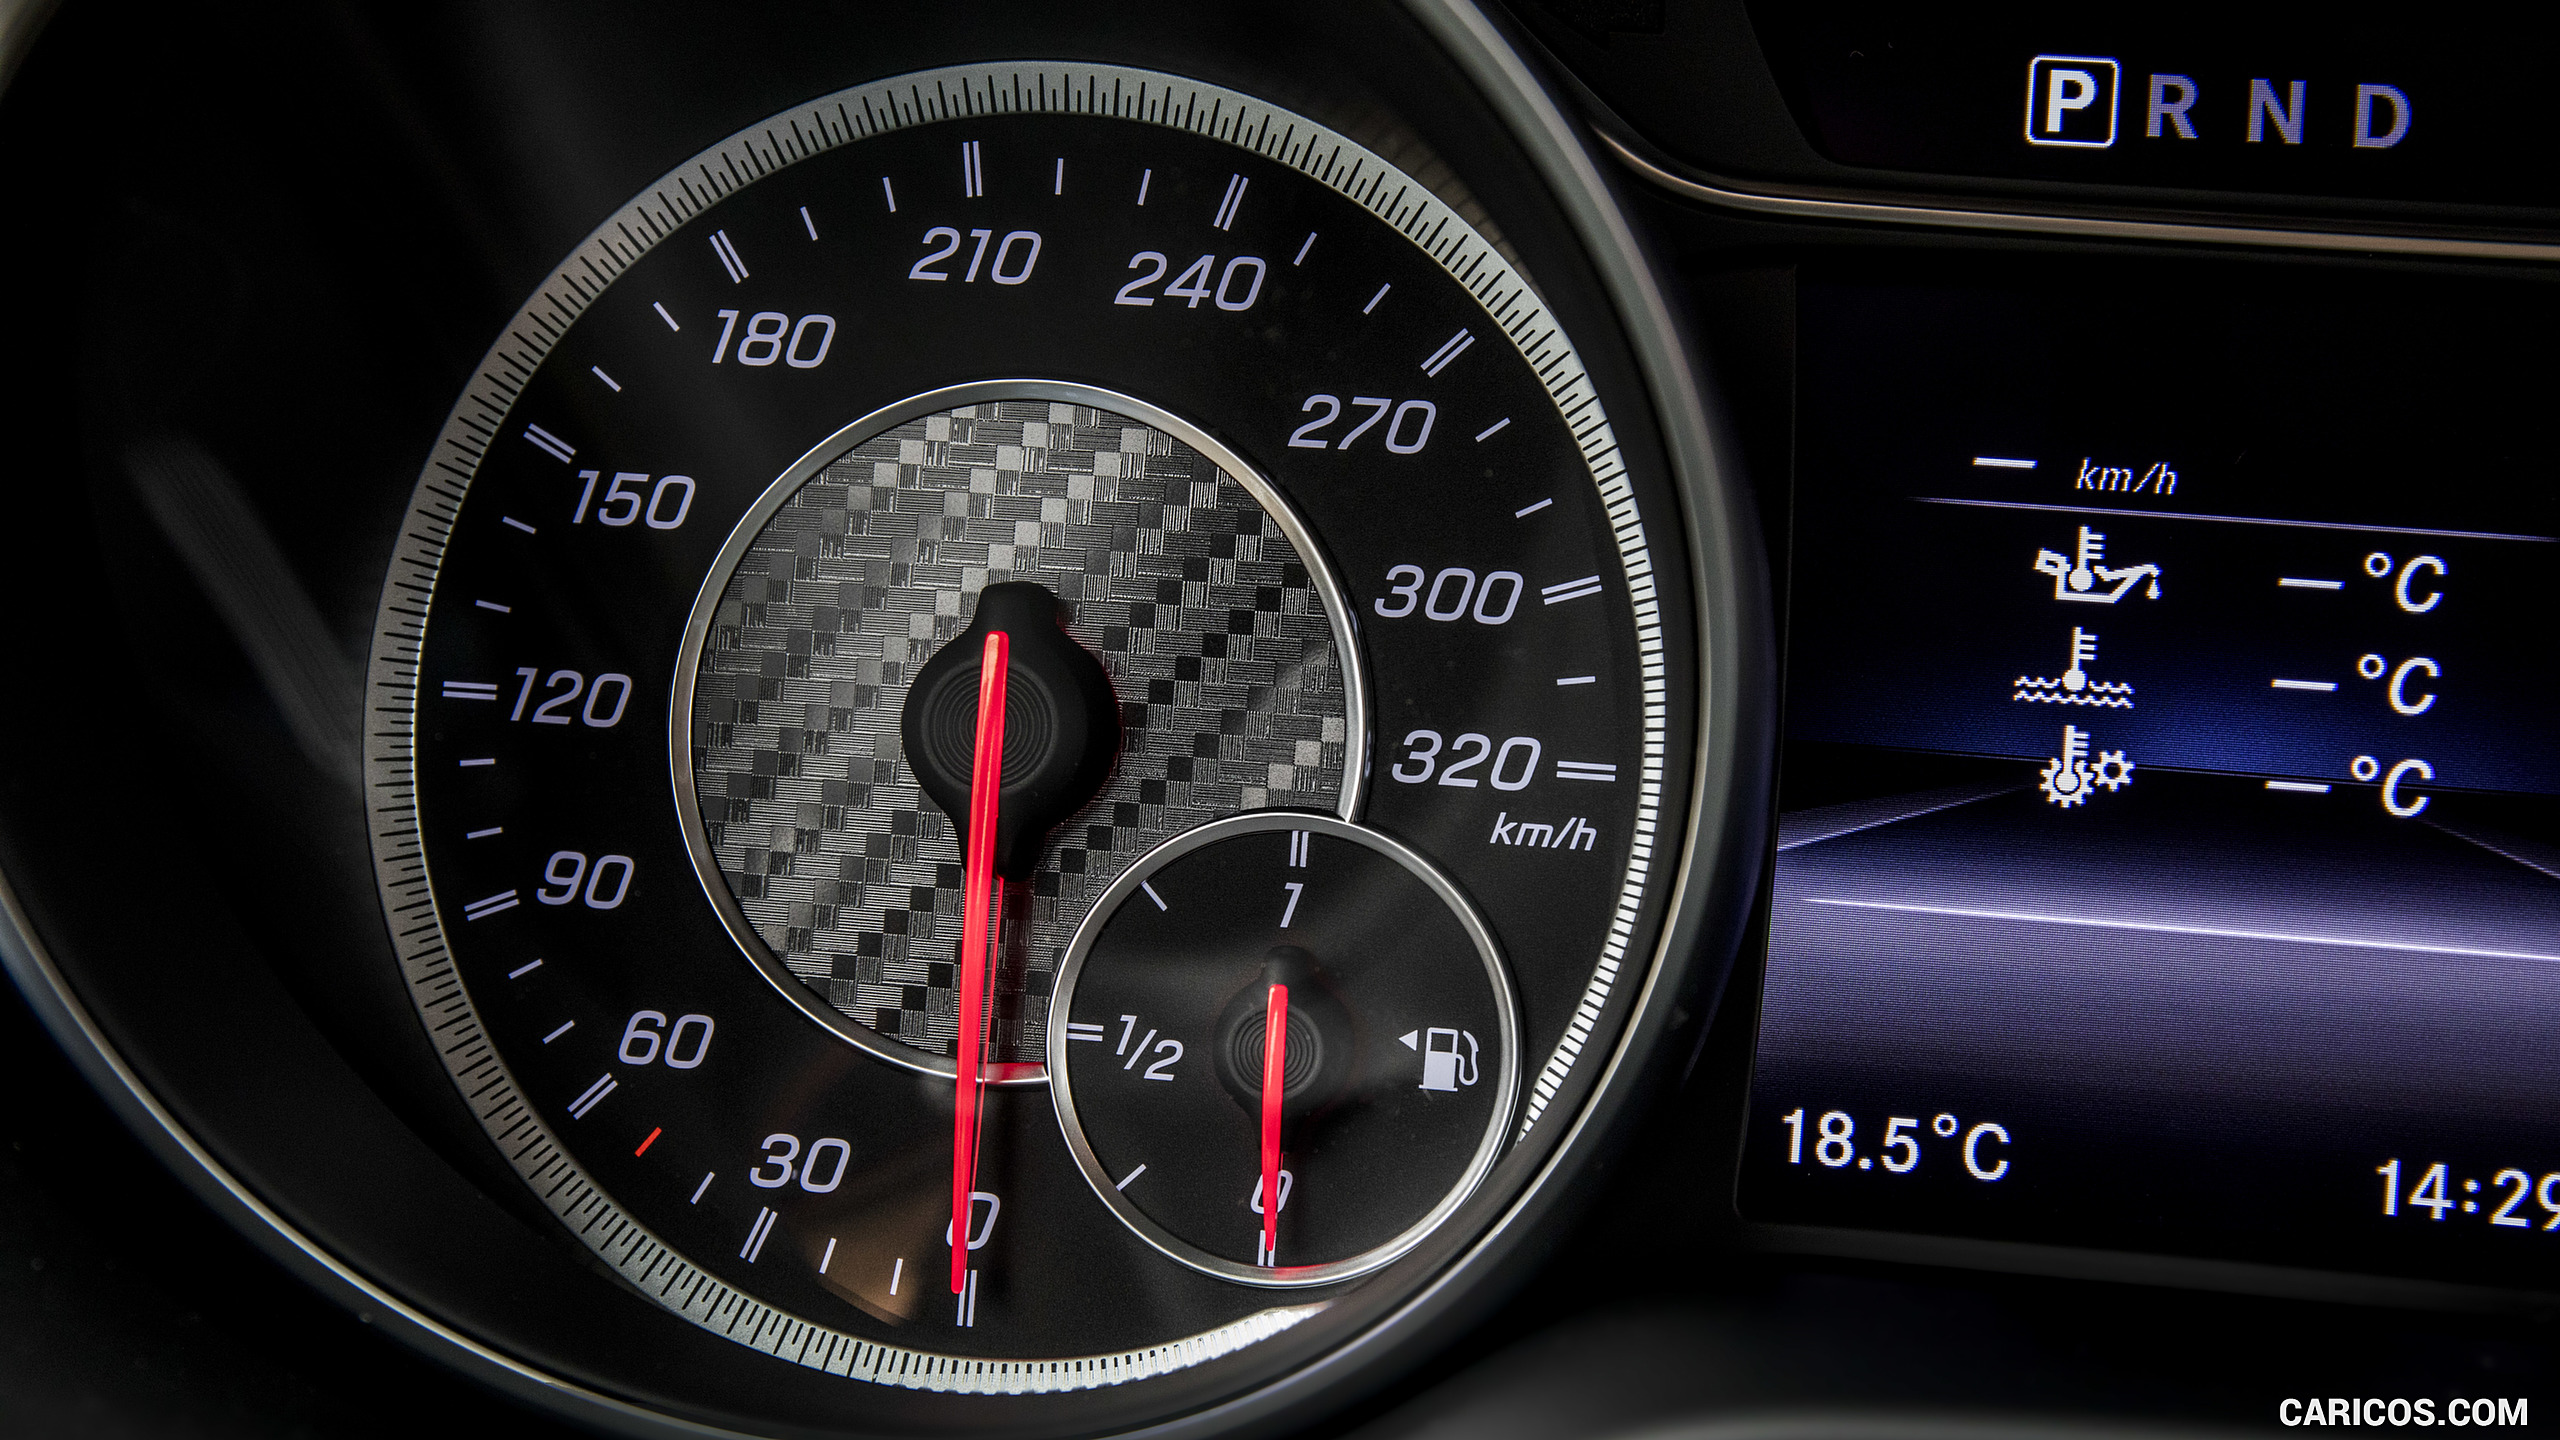 2018 Mercedes-AMG GLA 45 4MATIC - Instrument Cluster, #88 of 88